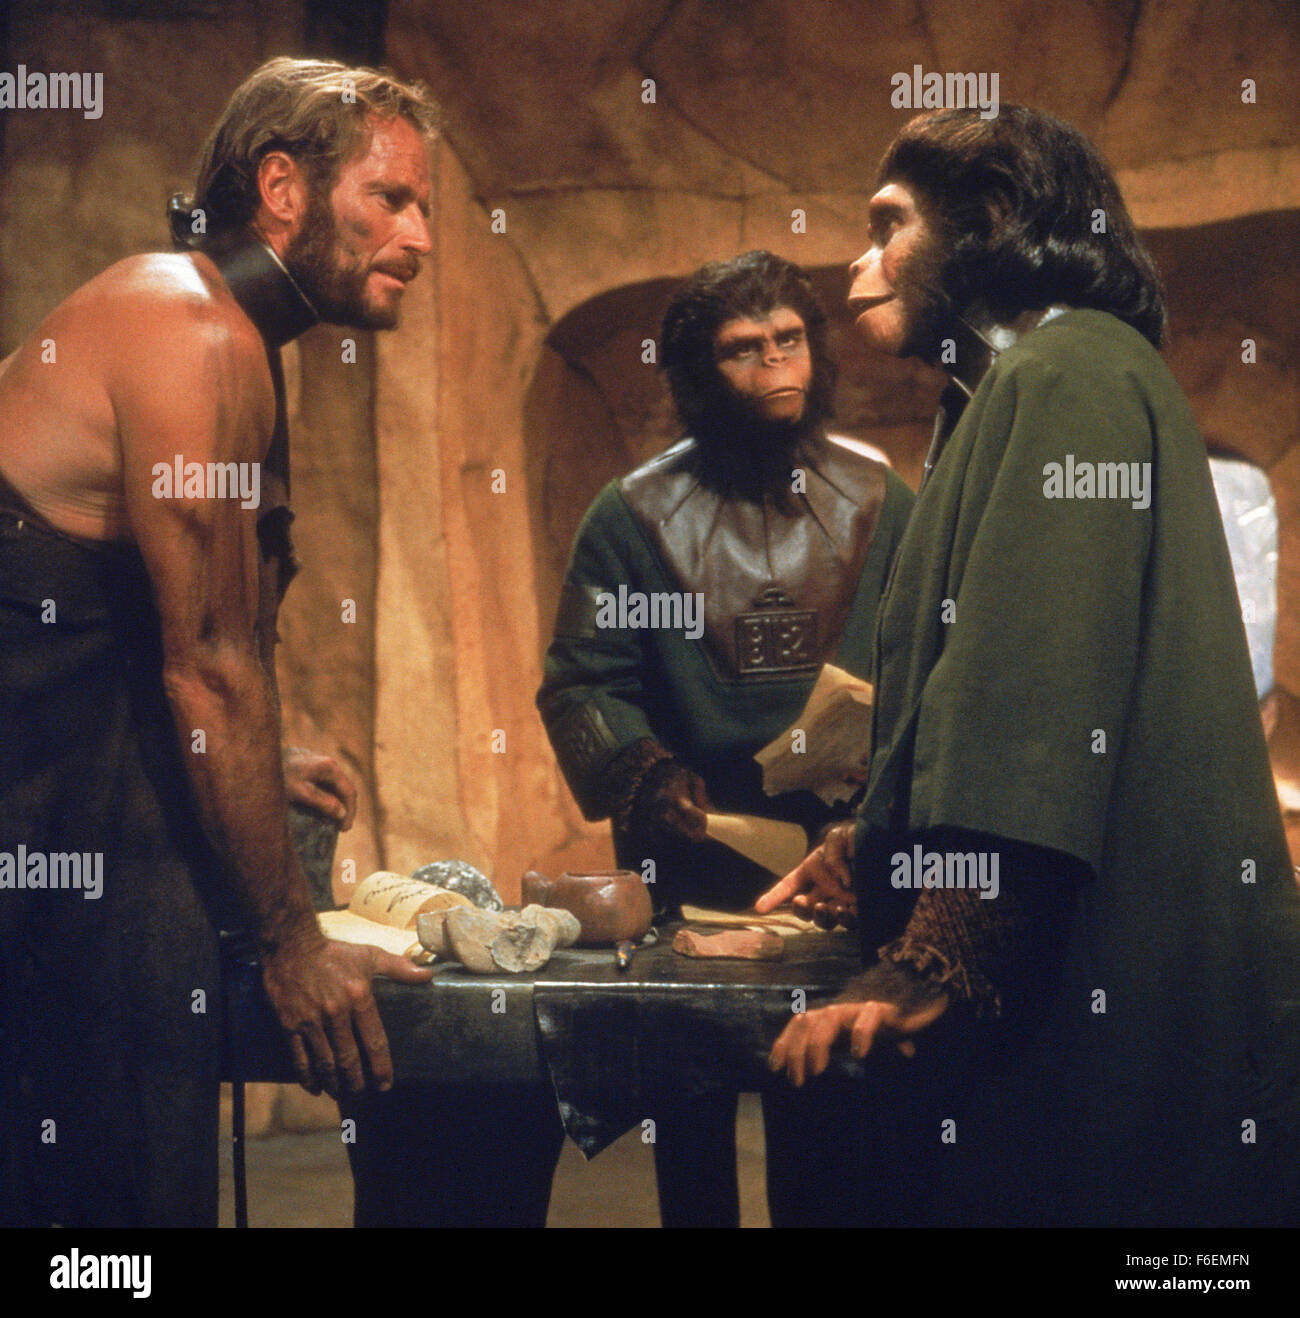 RELEASED DATE: Feb 08, 1968. MOVIE TITLE: Planet of the Apes. STUDIO: 20th Century Fox. PLOT: Taylor and two other astronauts come out of deep hibernation to find that their ship has crashed. Escaping with little more than clothes they find that they have landed on a planet where men are pre-lingual and uncivilized while apes have learned speech and technology. Taylor is captured and taken to the city of the apes after damaging his throat so that he is silent and cannot communicate with the apes. PICTURED: CHARLTON HESTON as George Taylor and KIM HUNTER as Zira. Stock Photo